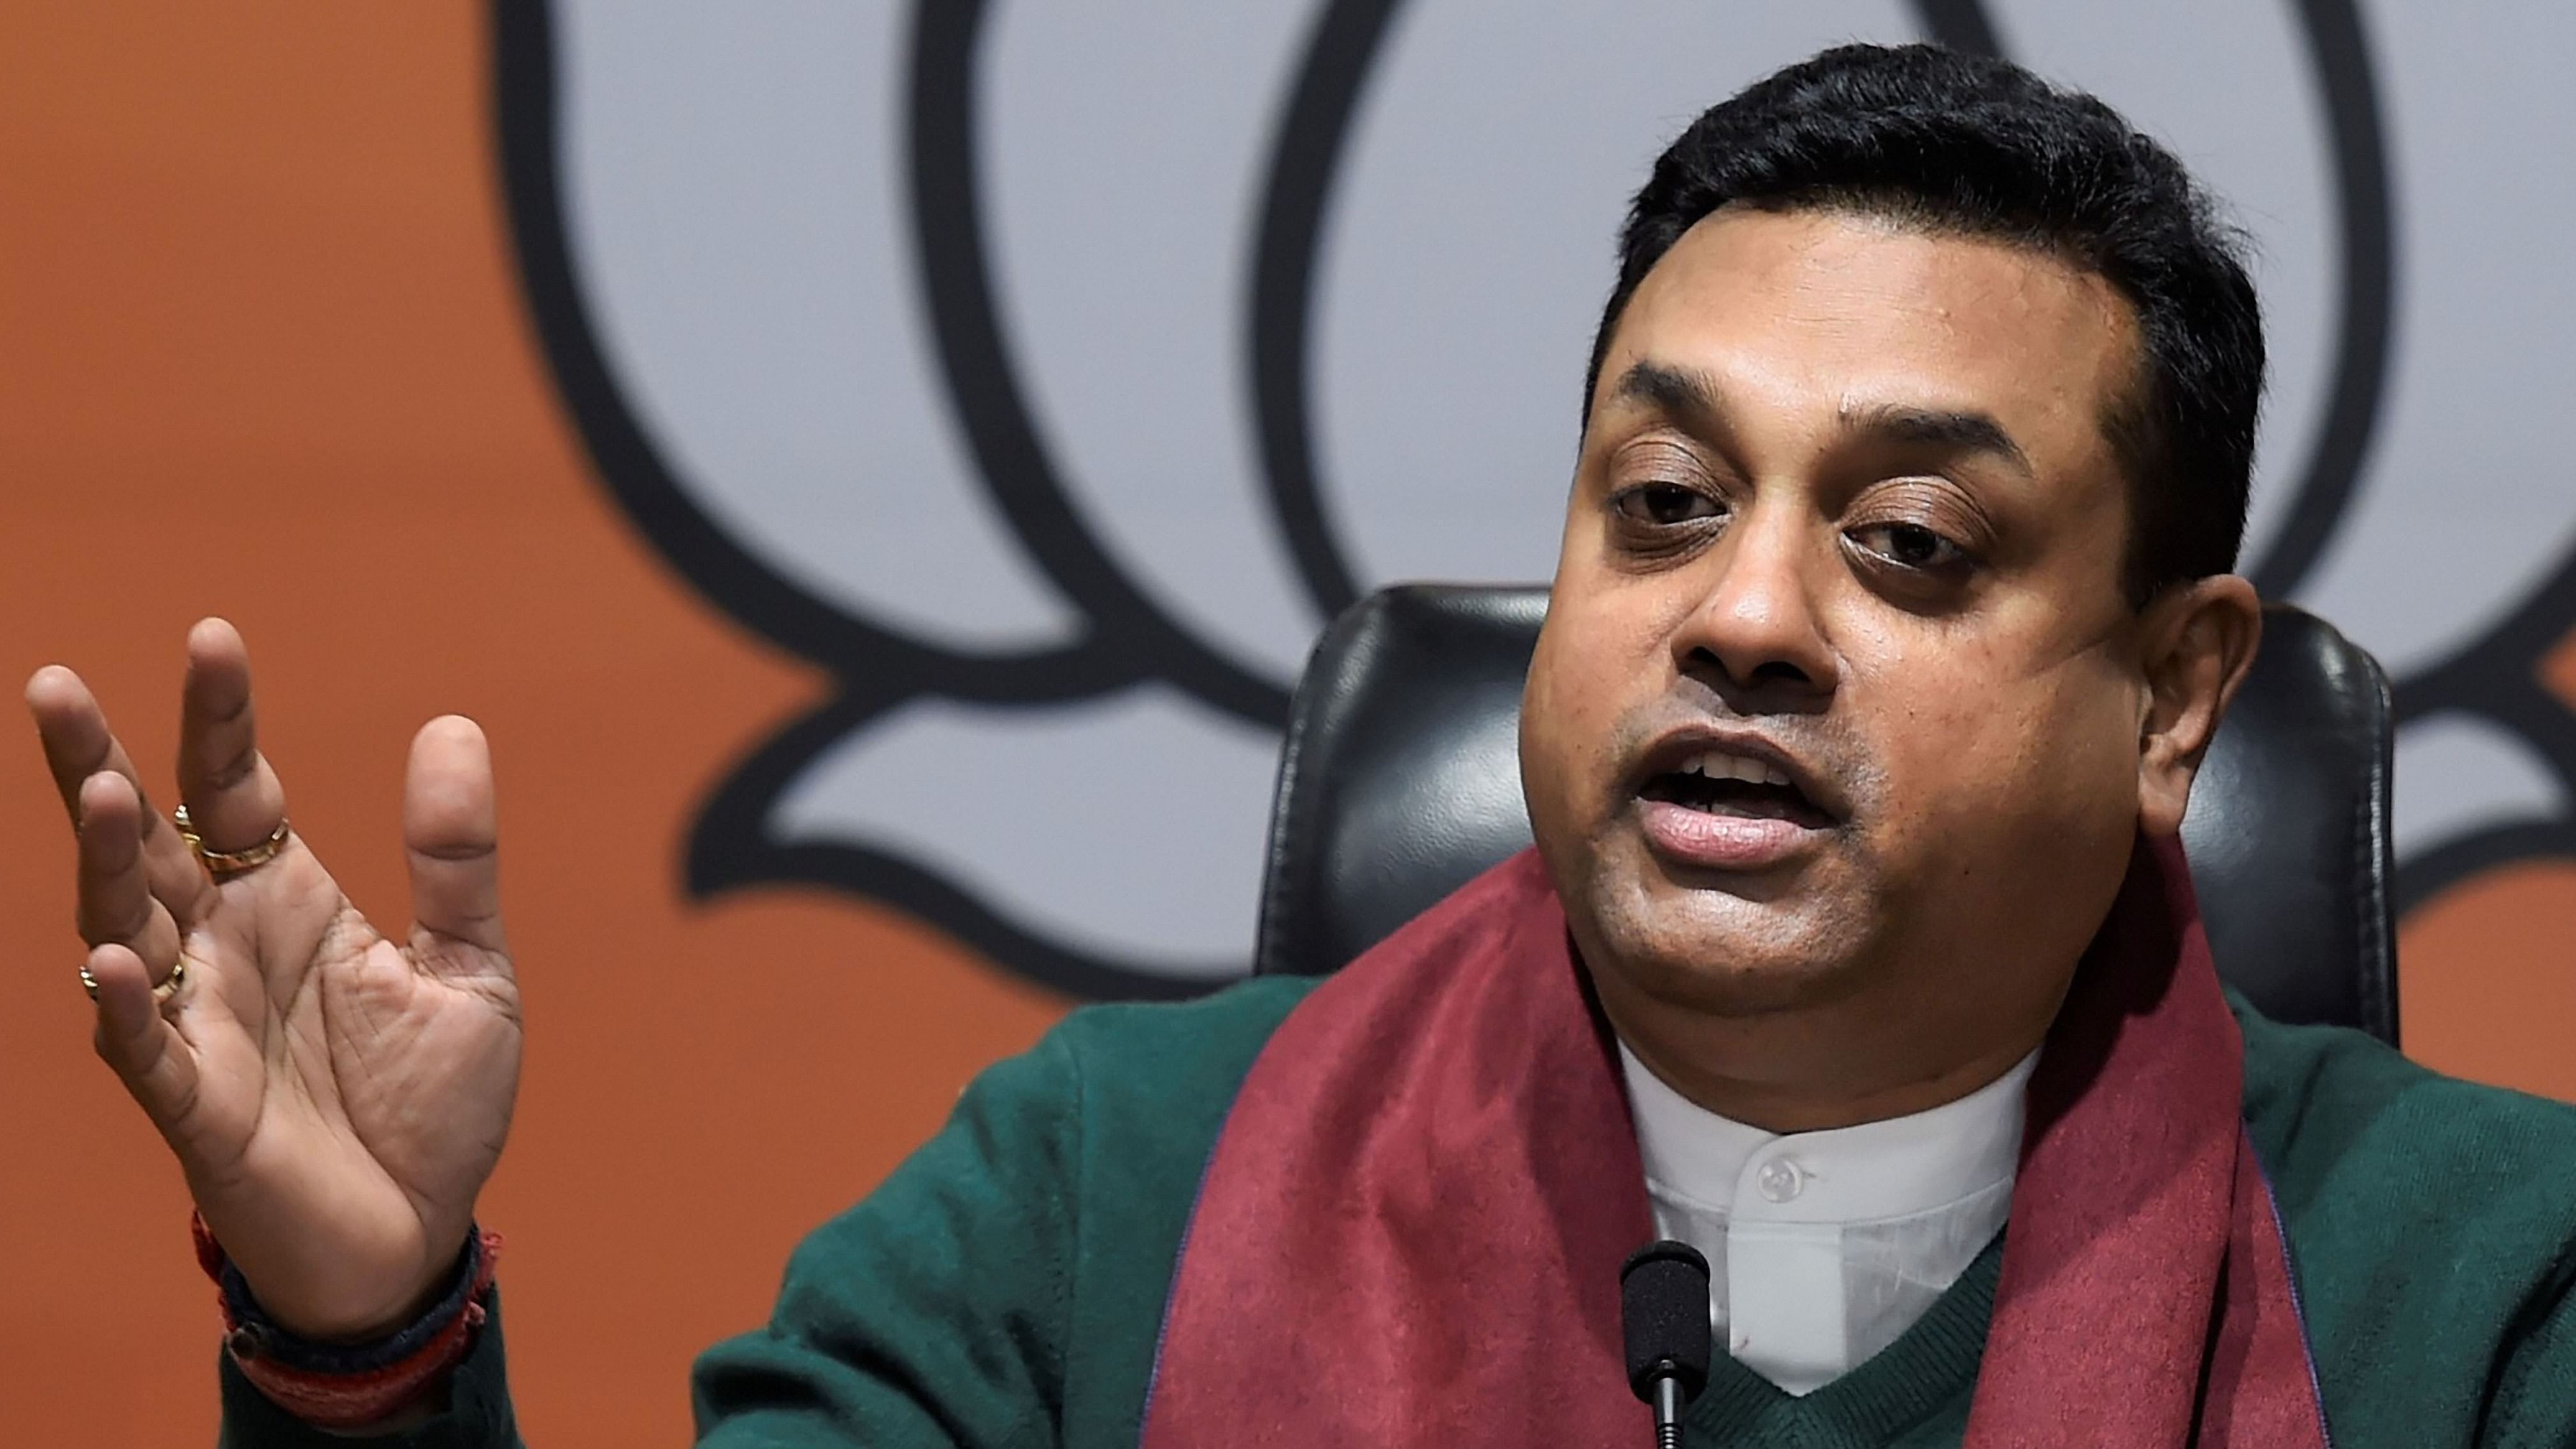 BJP spokesperson Sambit Patra said Delhi Chief Minister Arvind Kejriwal and Sisodia have been speaking daily on the issue and attacking the Narendra Modi government so that they can project the deputy chief minister as a "victim" if legal action is taken against him. Credit: PTI File Photo